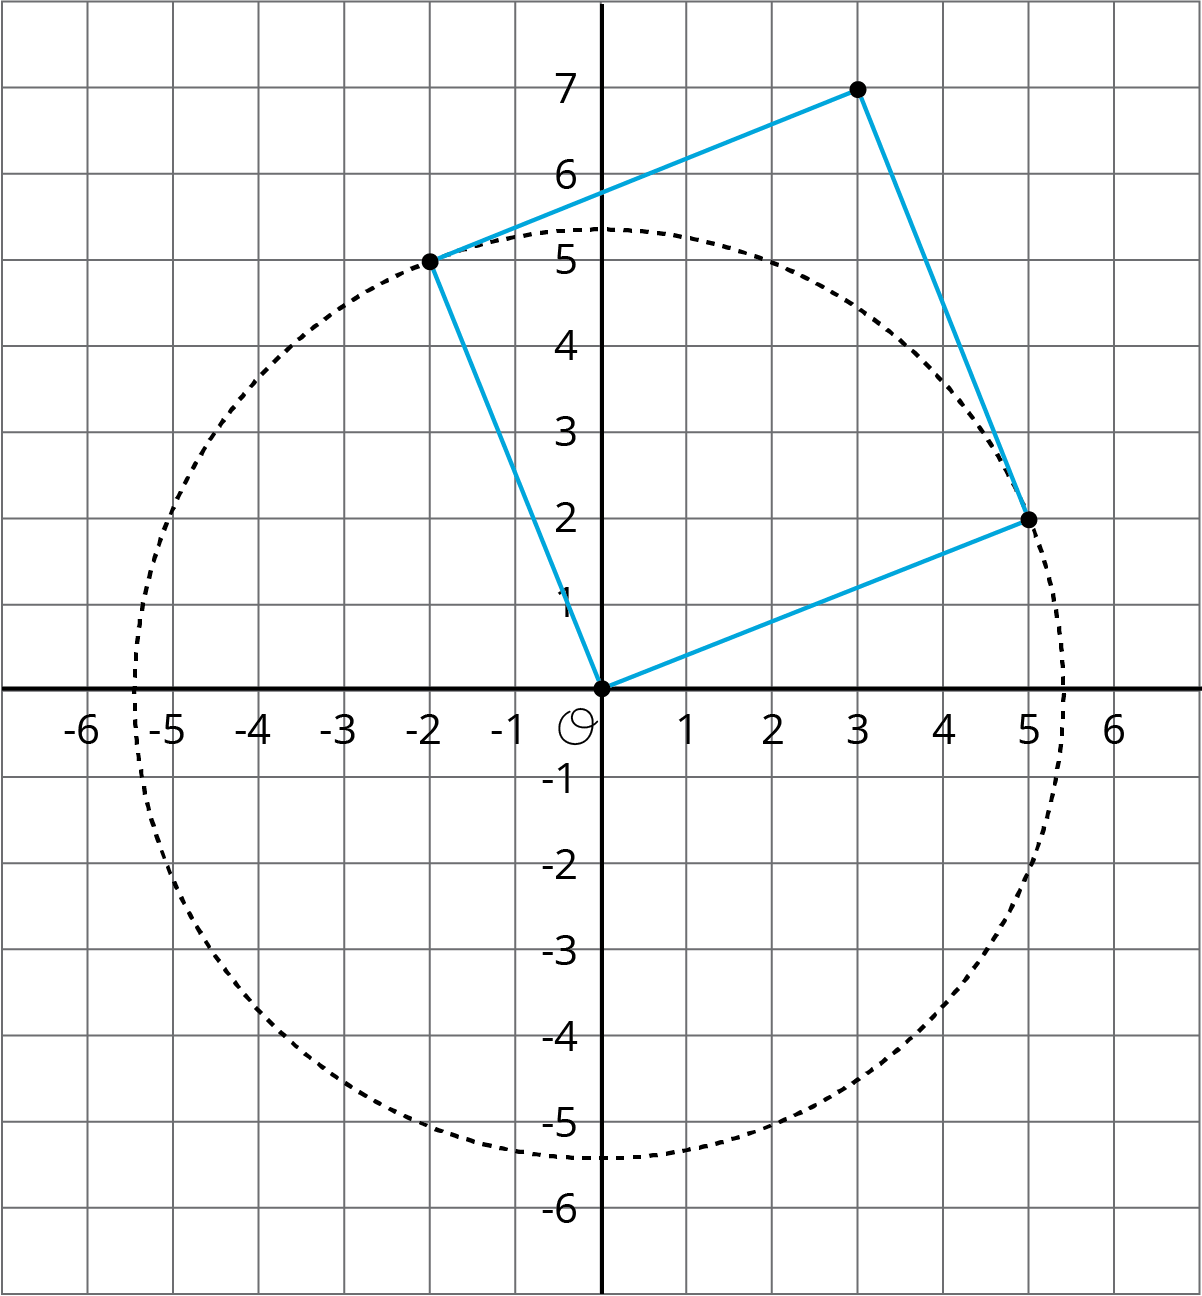 A coordinate grid with the origin labeled “O.” The x-axis has the numbers negative 6 through 6 indicated with gridlines. The y-axis has the numbers negative 6 through 7 indicated with gridlines. A square and a circle are drawn on the grid so that the circle’s circumference passes through 2 of the squares vertices. The circle’s center is the origin and it’s circumference is indicated by a dashed line that passes through the following approximate points on the axes: Negative 5 point 3 comma 0, 0 comma 5 point 3, 5 point 3 comma 0, and 0 comma negative 5 point 3. The square is tilted so that all its sides are diagonal to the coordinate grid. It has vertices at: 0 comma 0, negative 2 comma 5, 3 comma 7, and 5 comma 2. The circumference of the circle passes through the square’s vertices at negative 2 comma 5 and 5 comma 2 so that the sides of the square, extending from the origin to those 2 vertices, are within the circle.